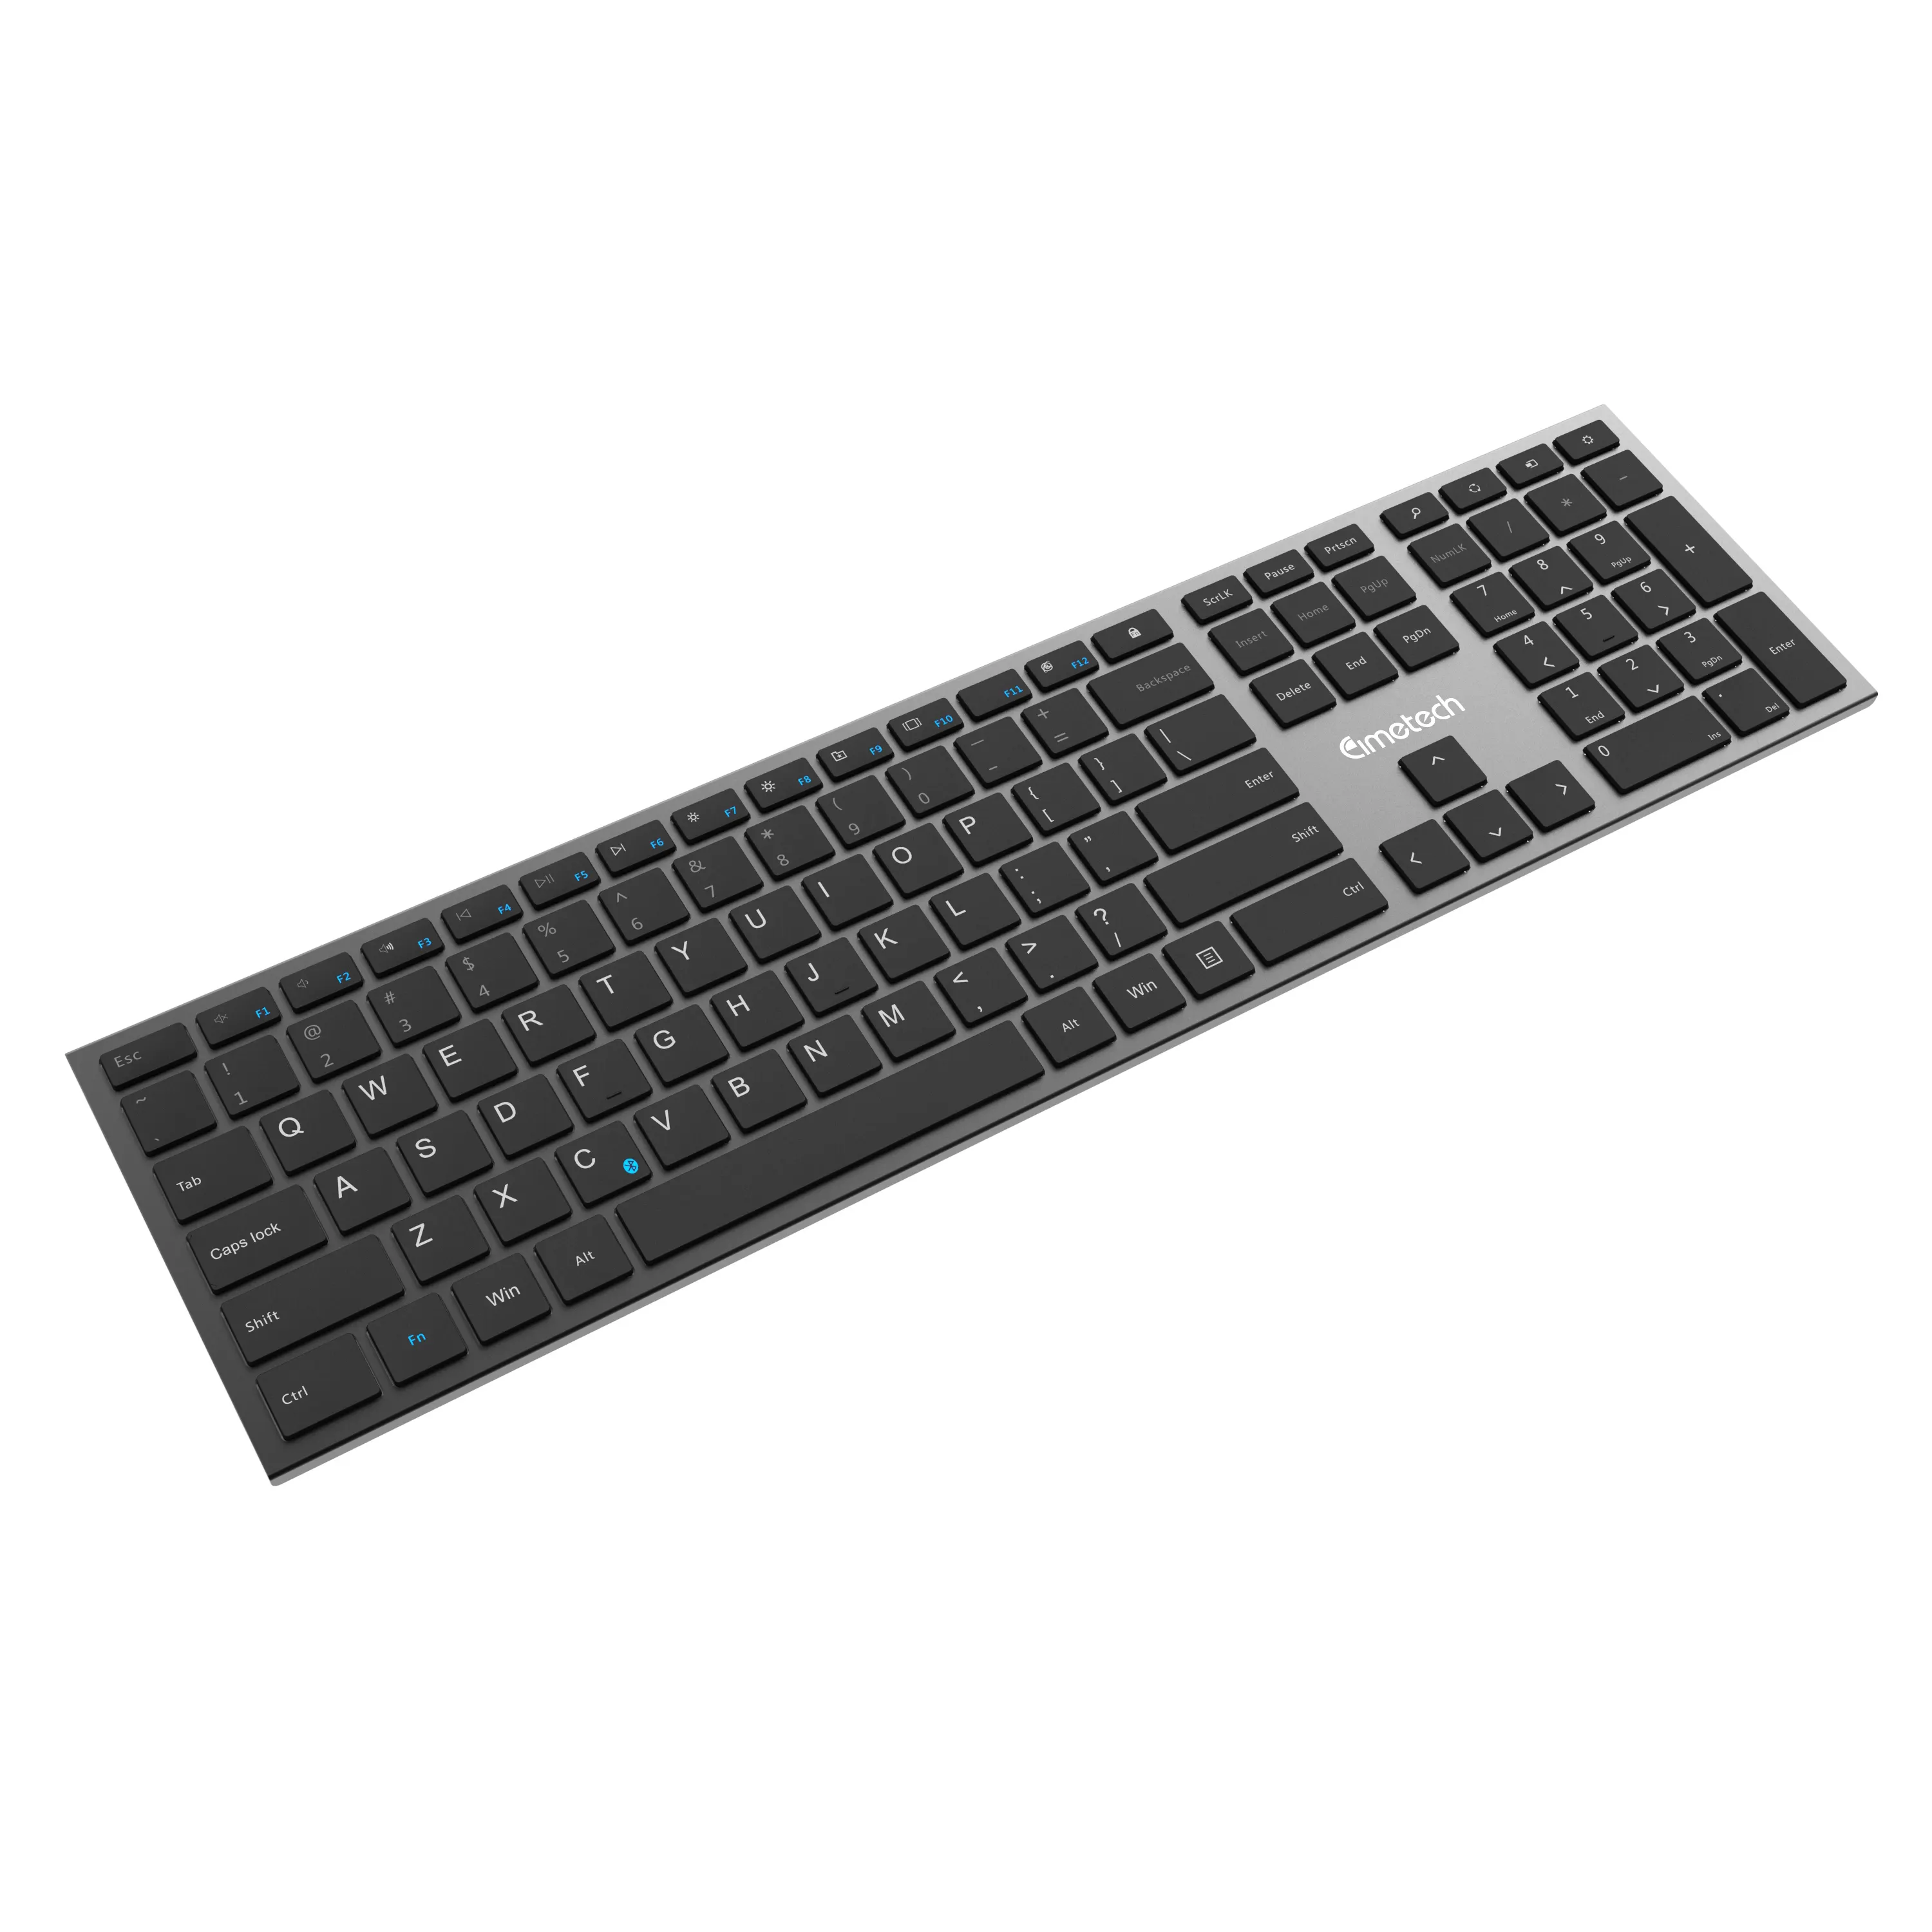 Hot Sell Portable Super Slim Bt+2,4G Features Dual-Mode Simple And Stylishwireless Keyboard Set For Computer And Office